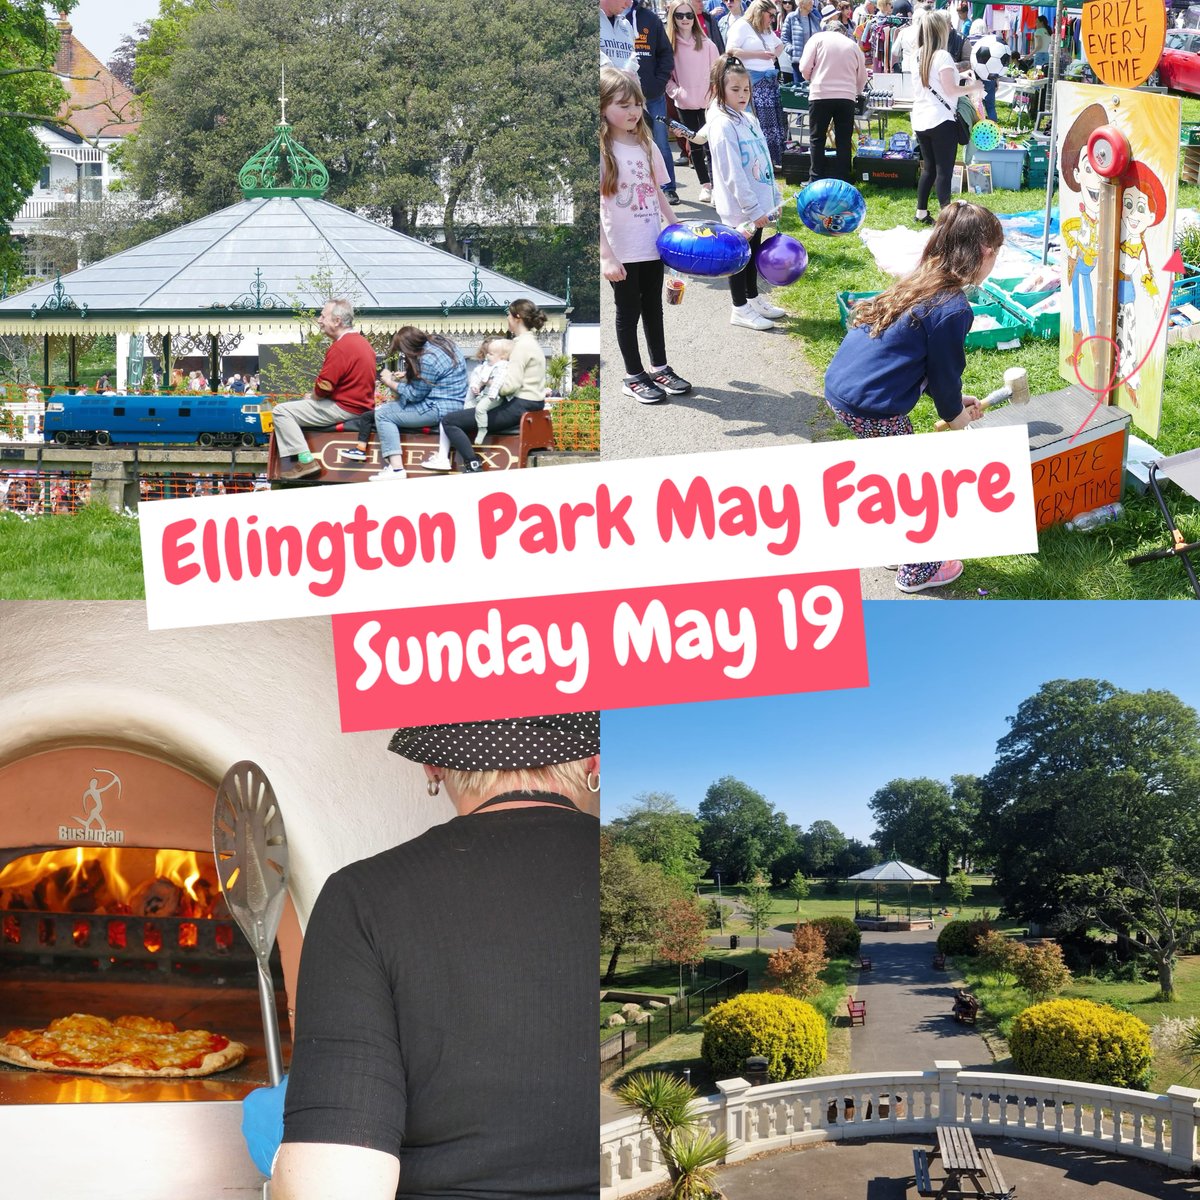 May Fayre at Ellington Park
19TH MAY 2024
10am - 6pm
A family fun day with train rides, huge bookshop, cafe, live entertainment, craft stalls, classic cars and so much more! Come and enjoy!
@Frank_Leppard
 #ramsgate #ramsgatekent #thanet #kent #kentevents #broadstairs #margate